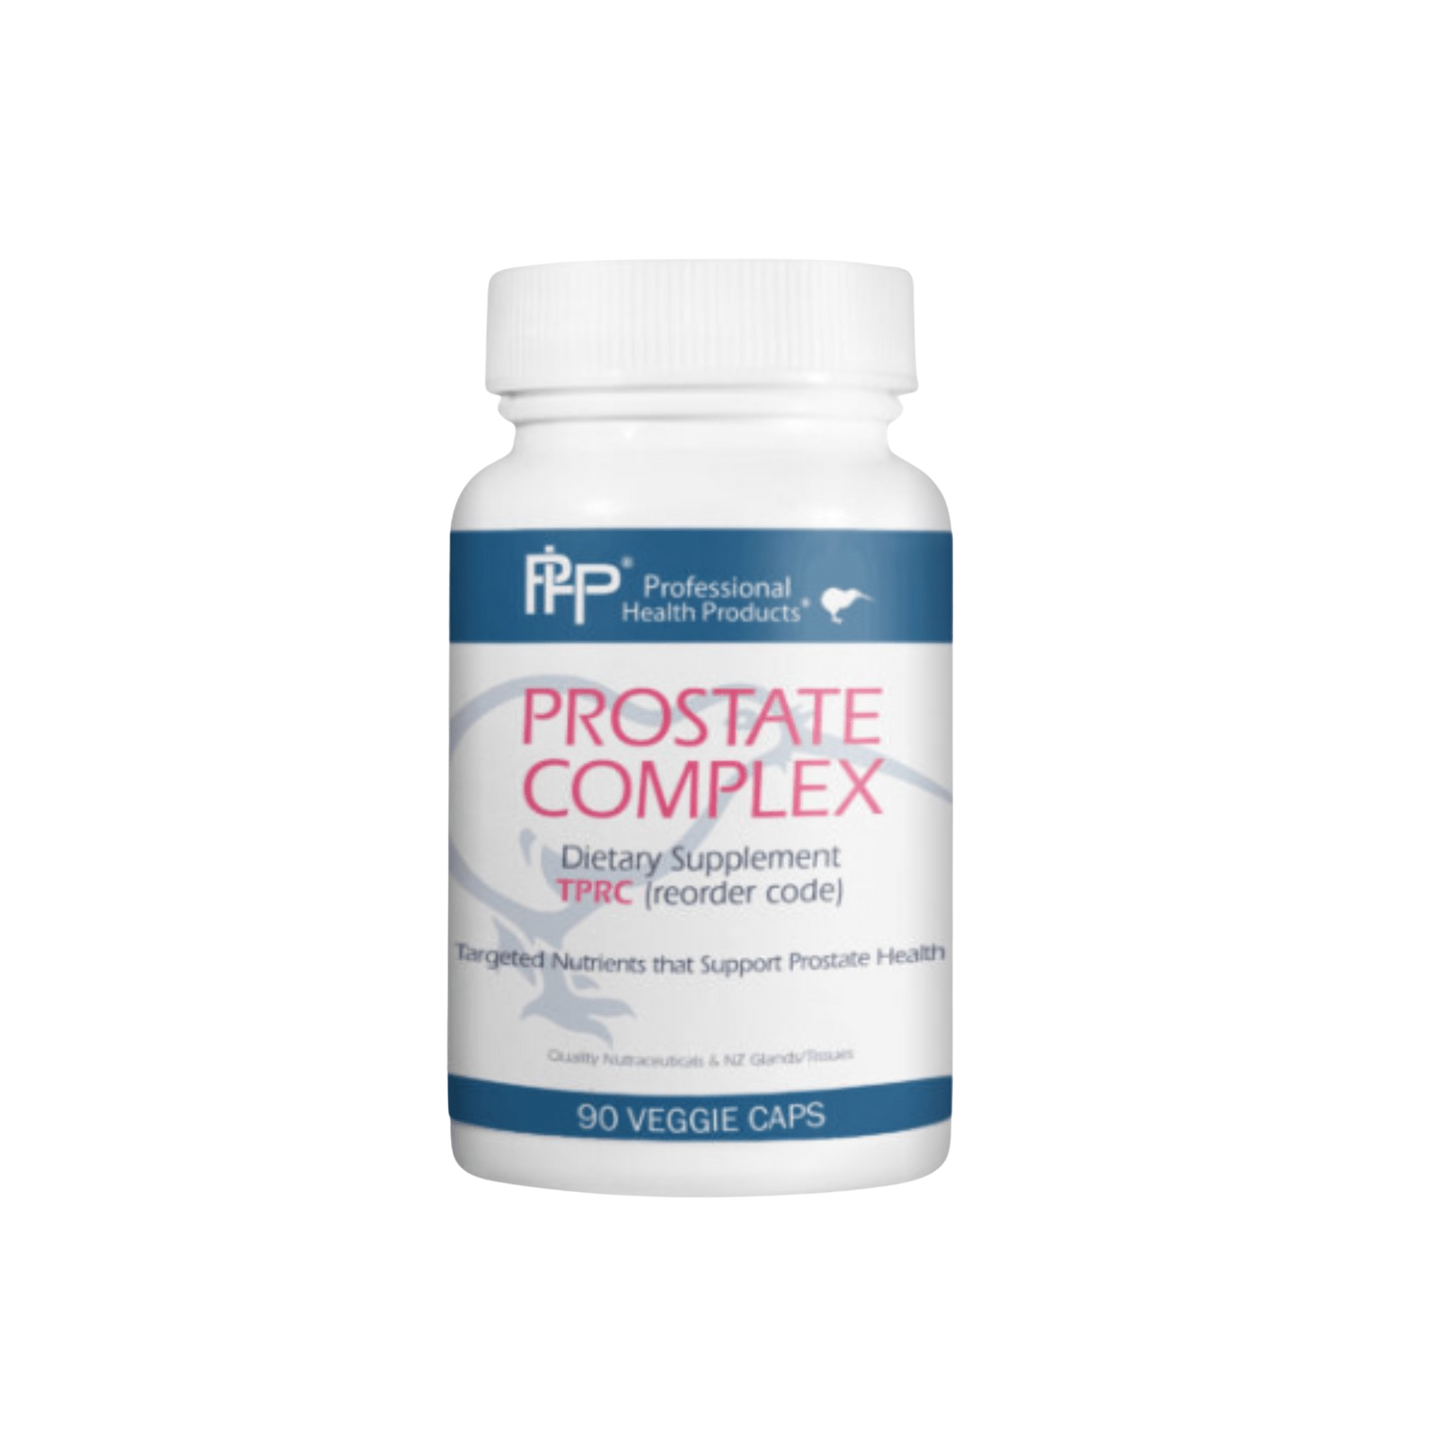 Professional Health Products Prostate Complex Capsules